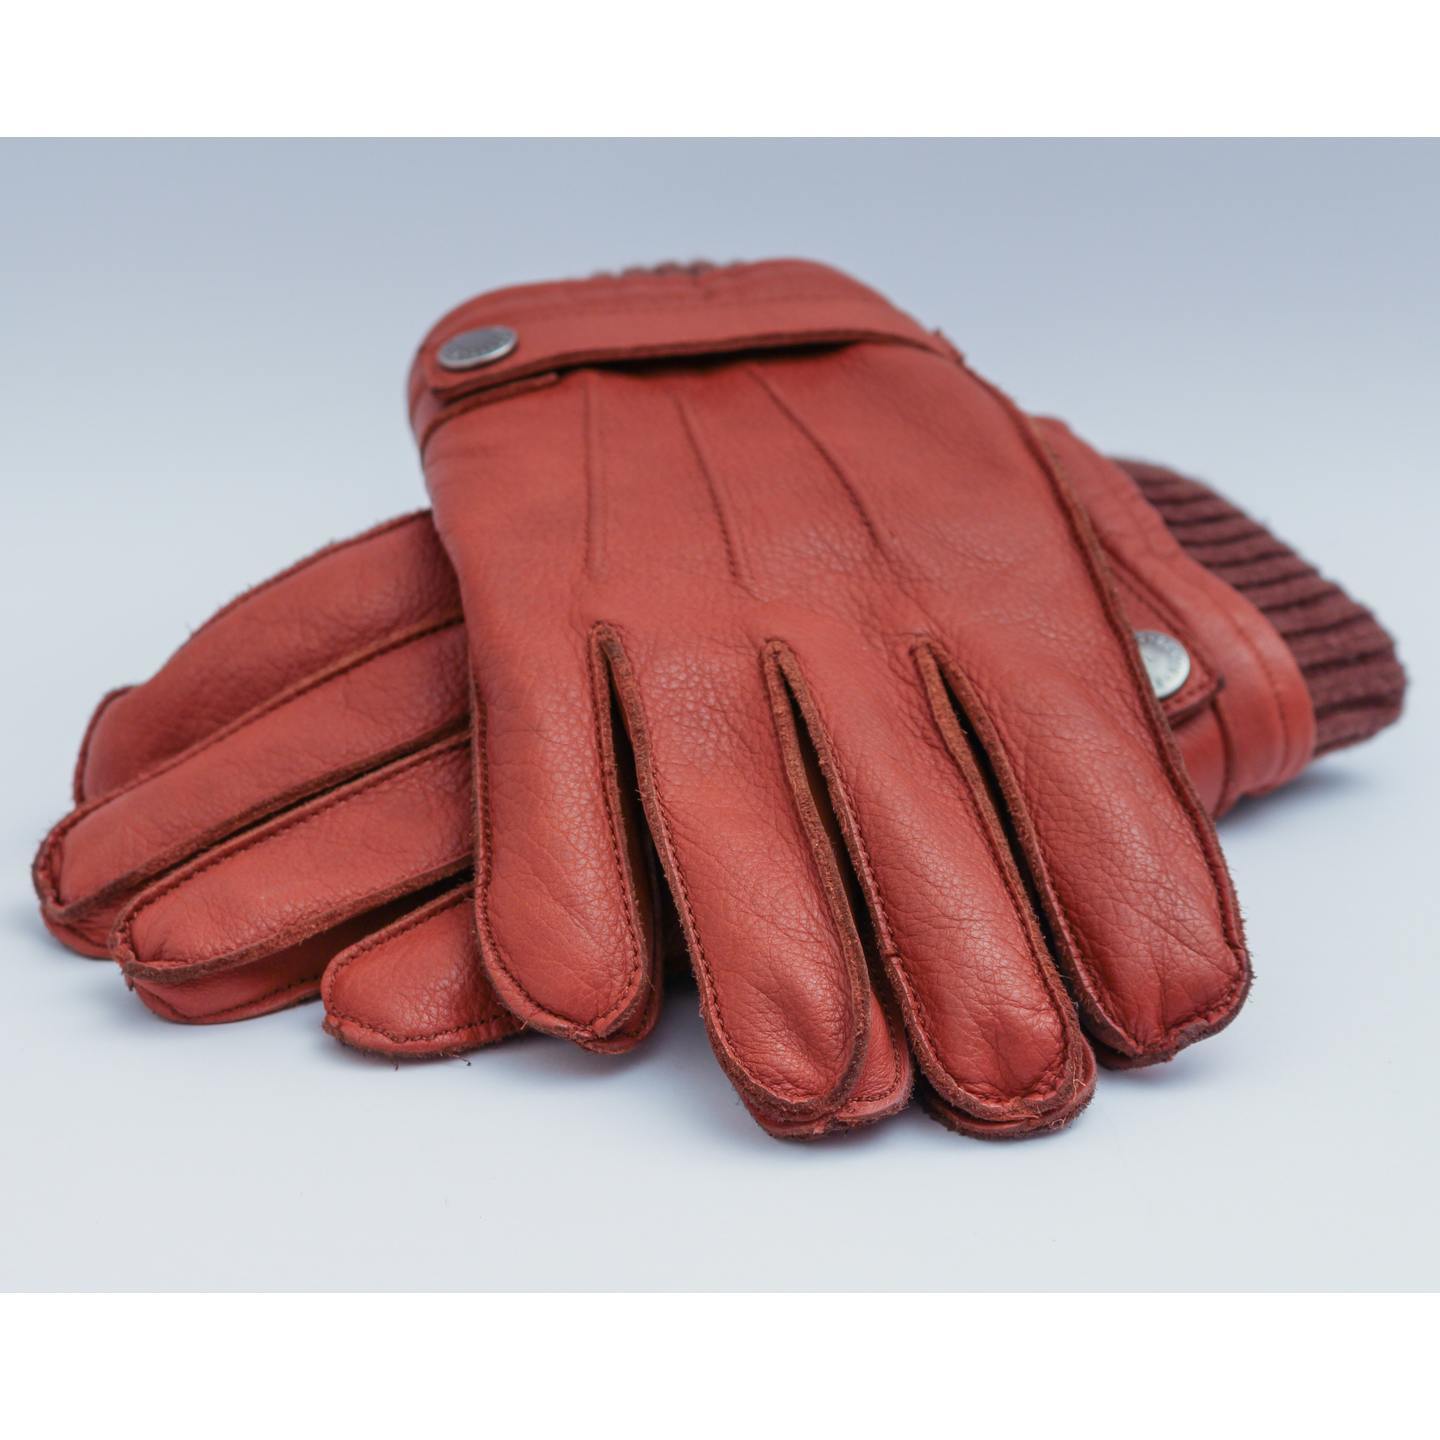 Leather Gloves - Pair Dry Clean